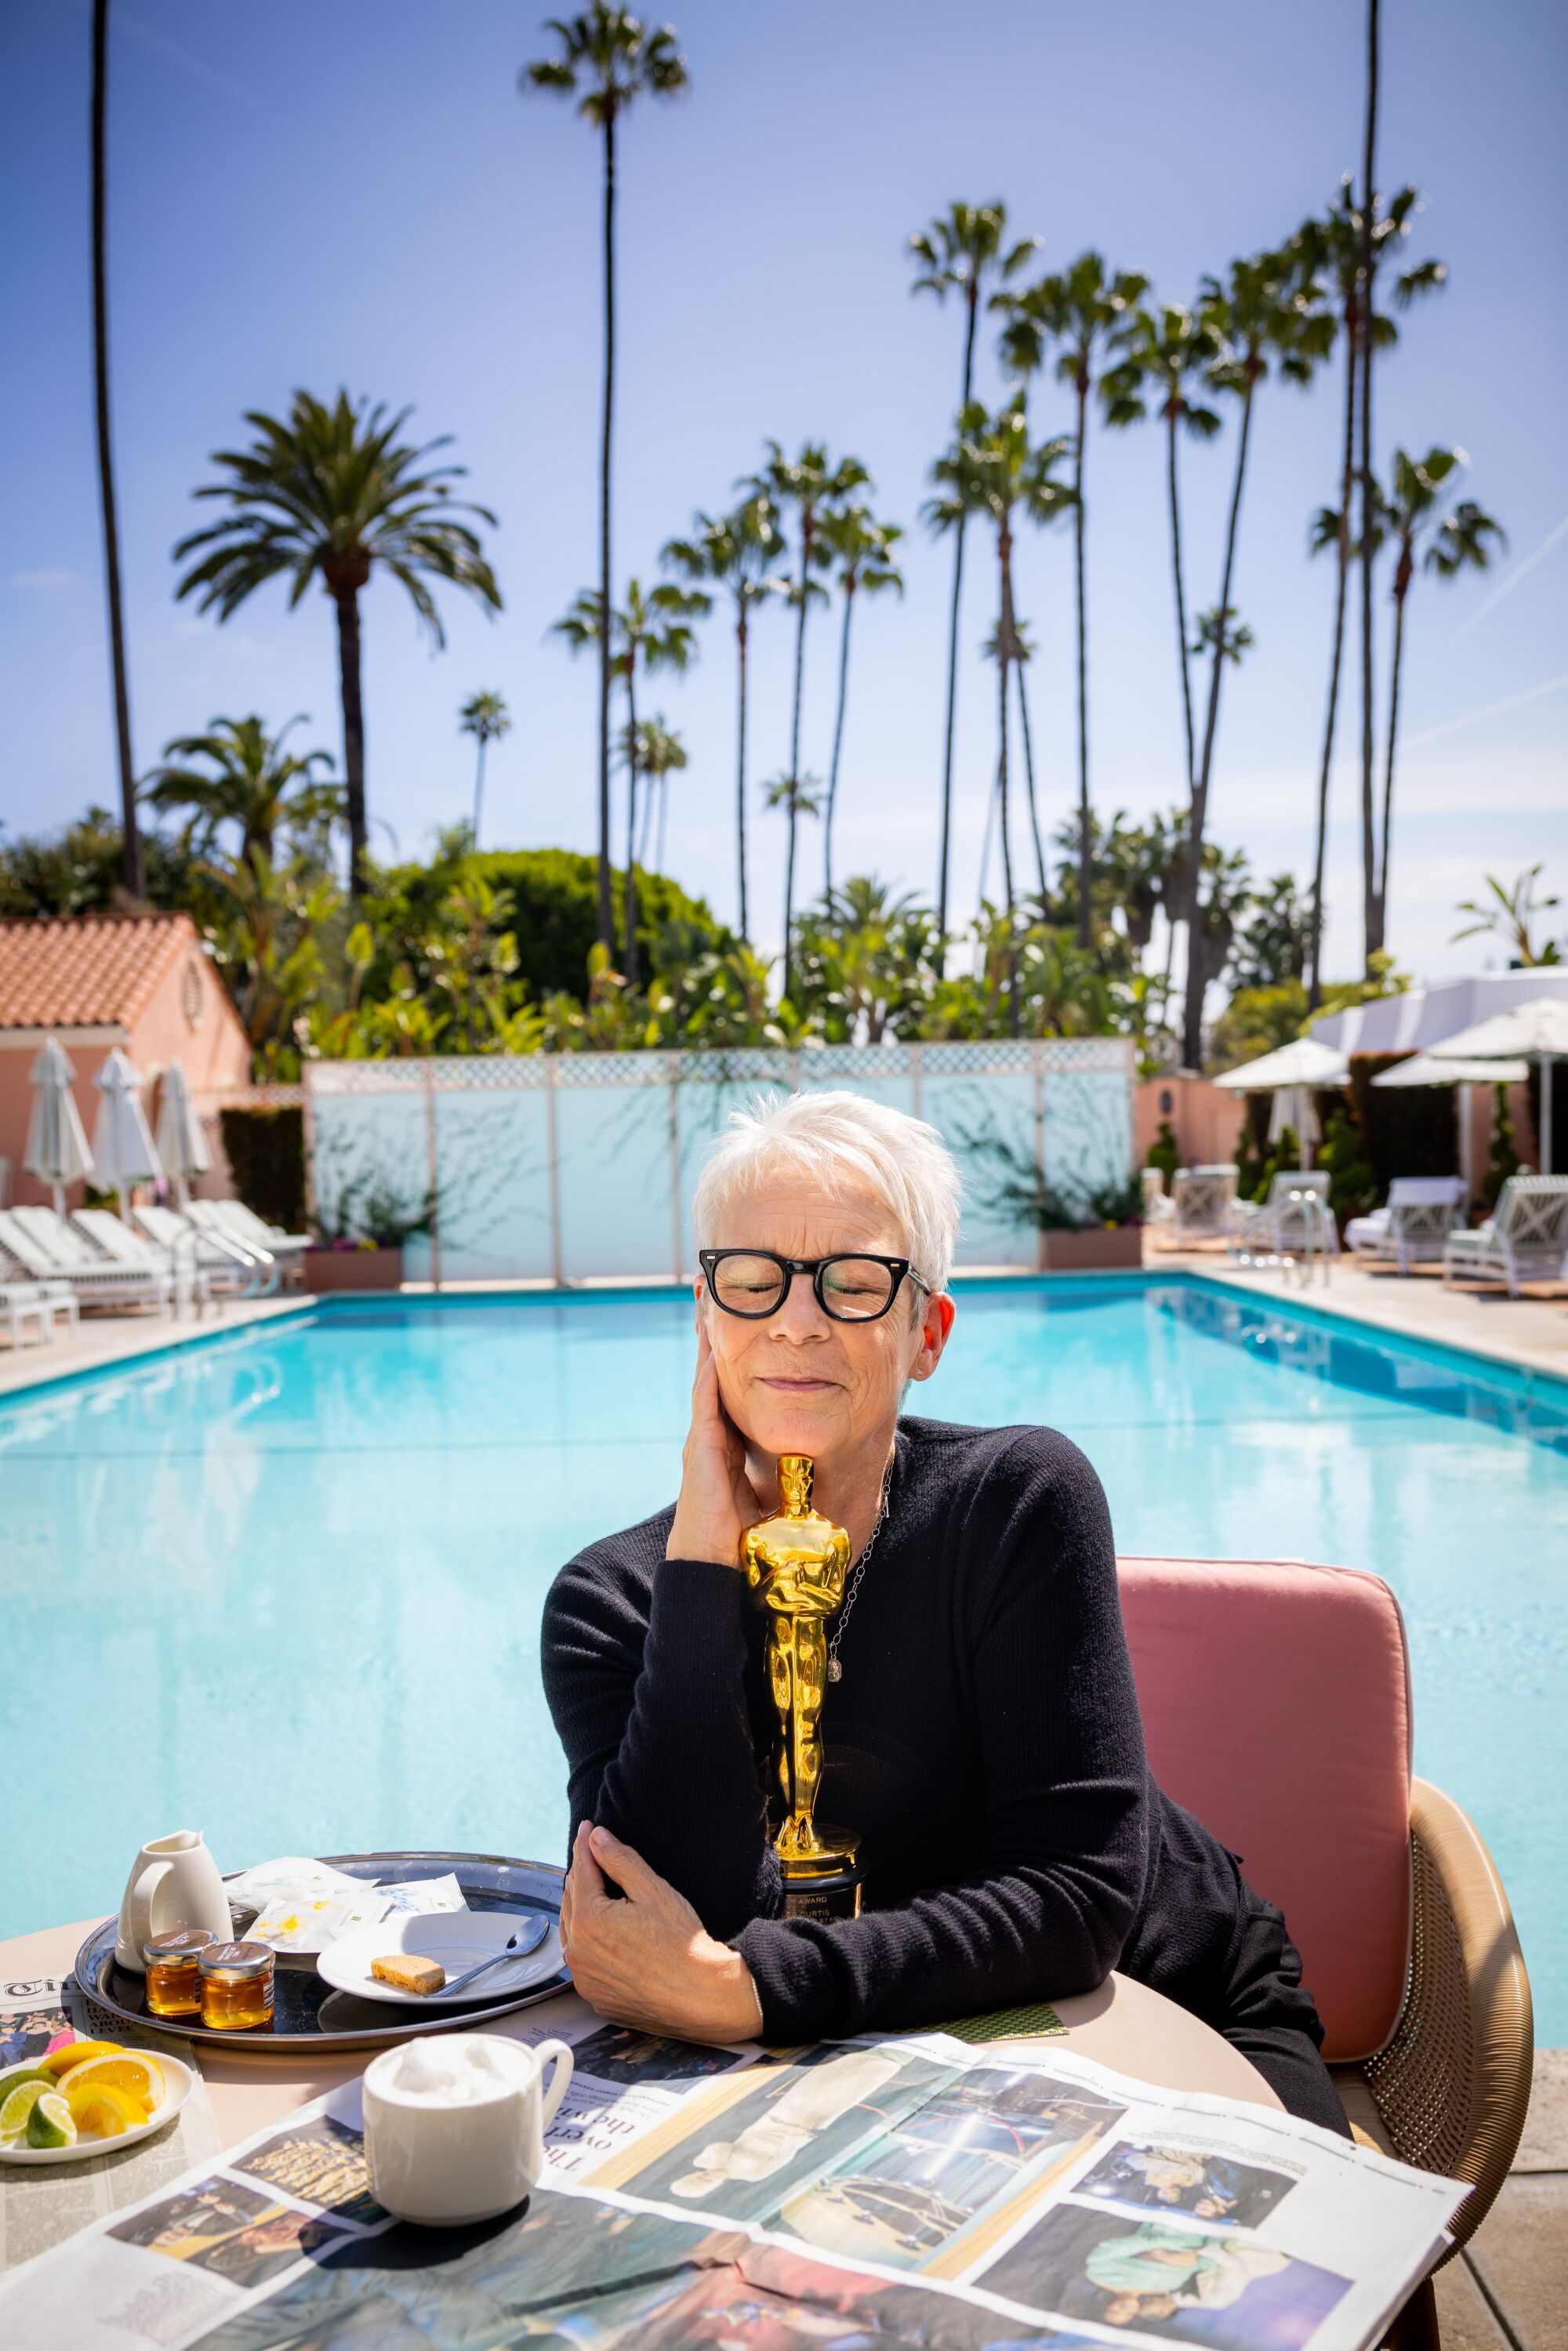 A woman in glasses and a dark sweater holds her Oscar trophy in front of a swimming pool.